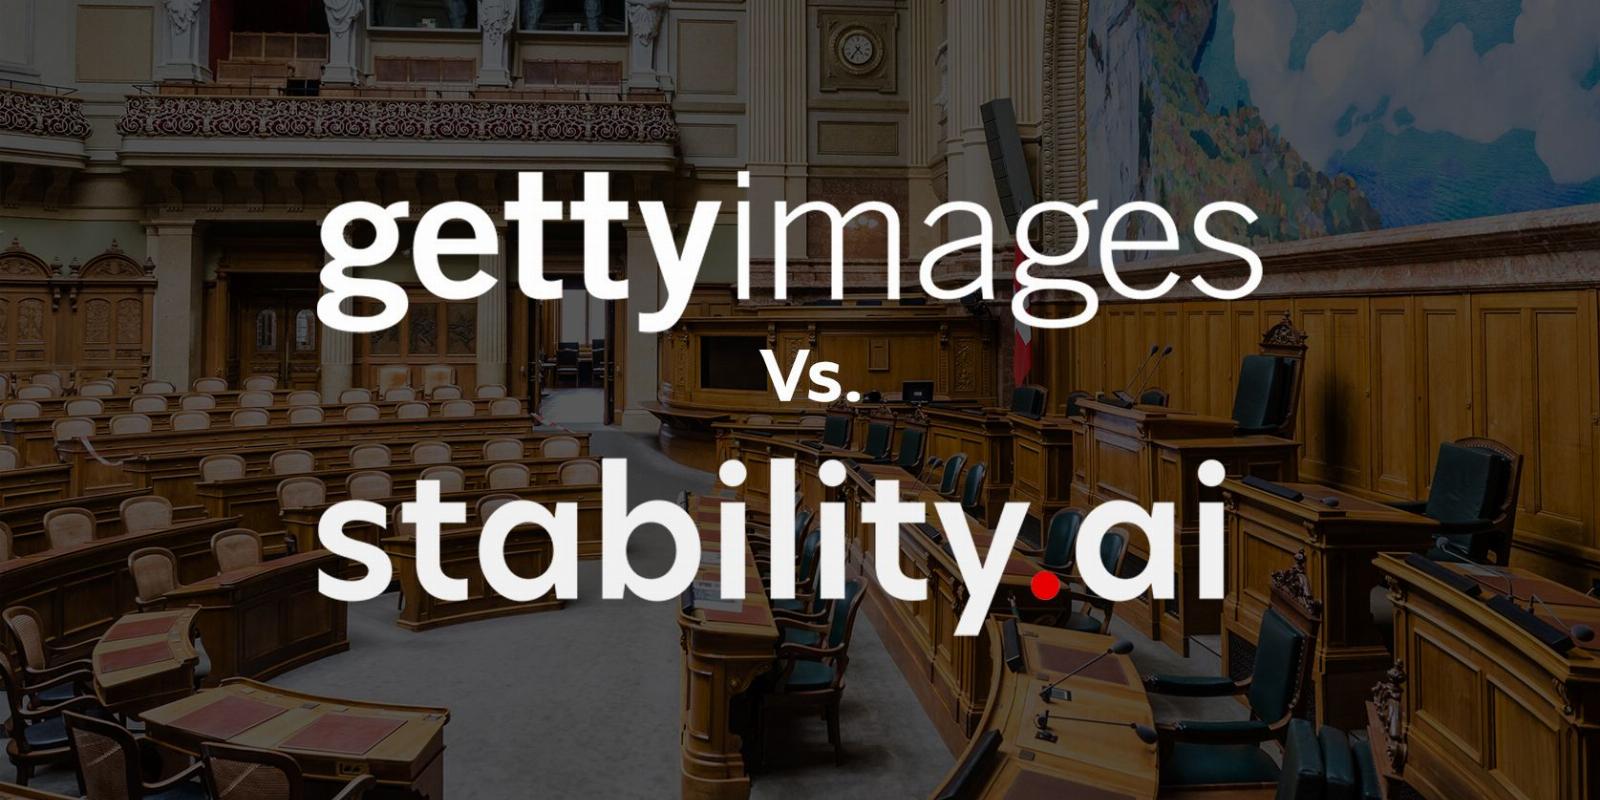 Why Getty Images Is Suing an AI Art Generator